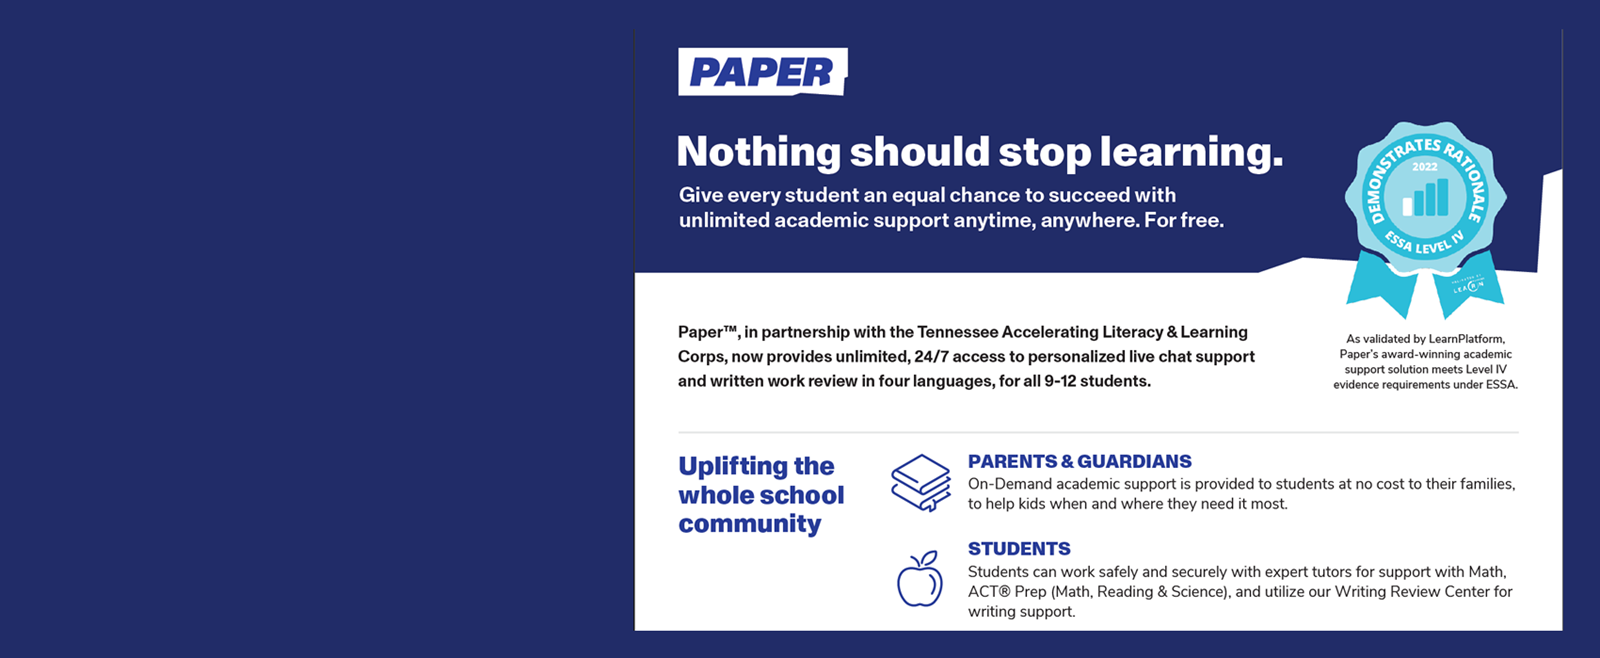 TDOE with Paper Tutoring Services